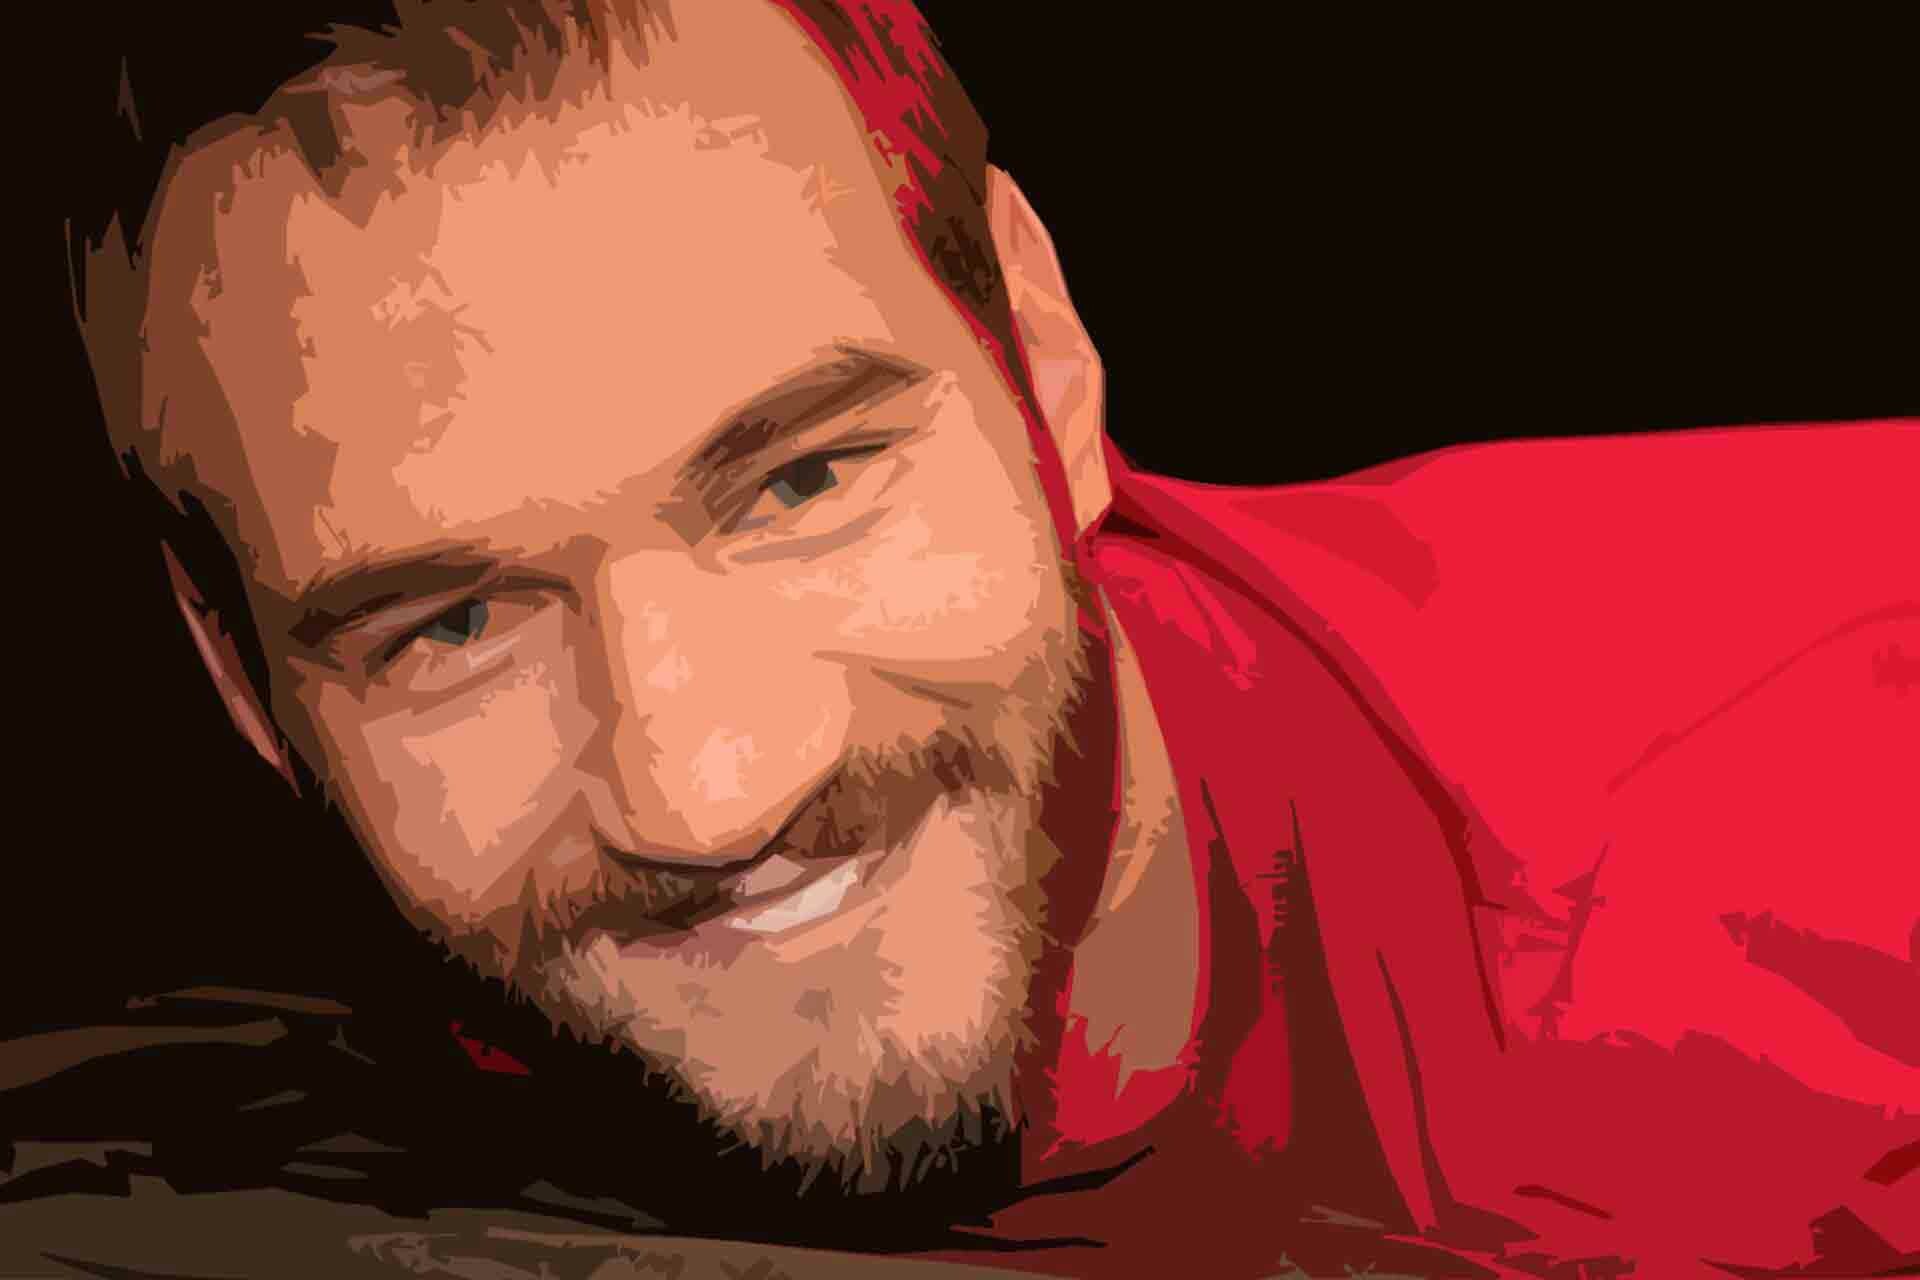 Nick Vujicic: Was awarded Best Actor in a Short Film at the 2010 Method Fest Independent Film Festival. 1920x1280 HD Wallpaper.